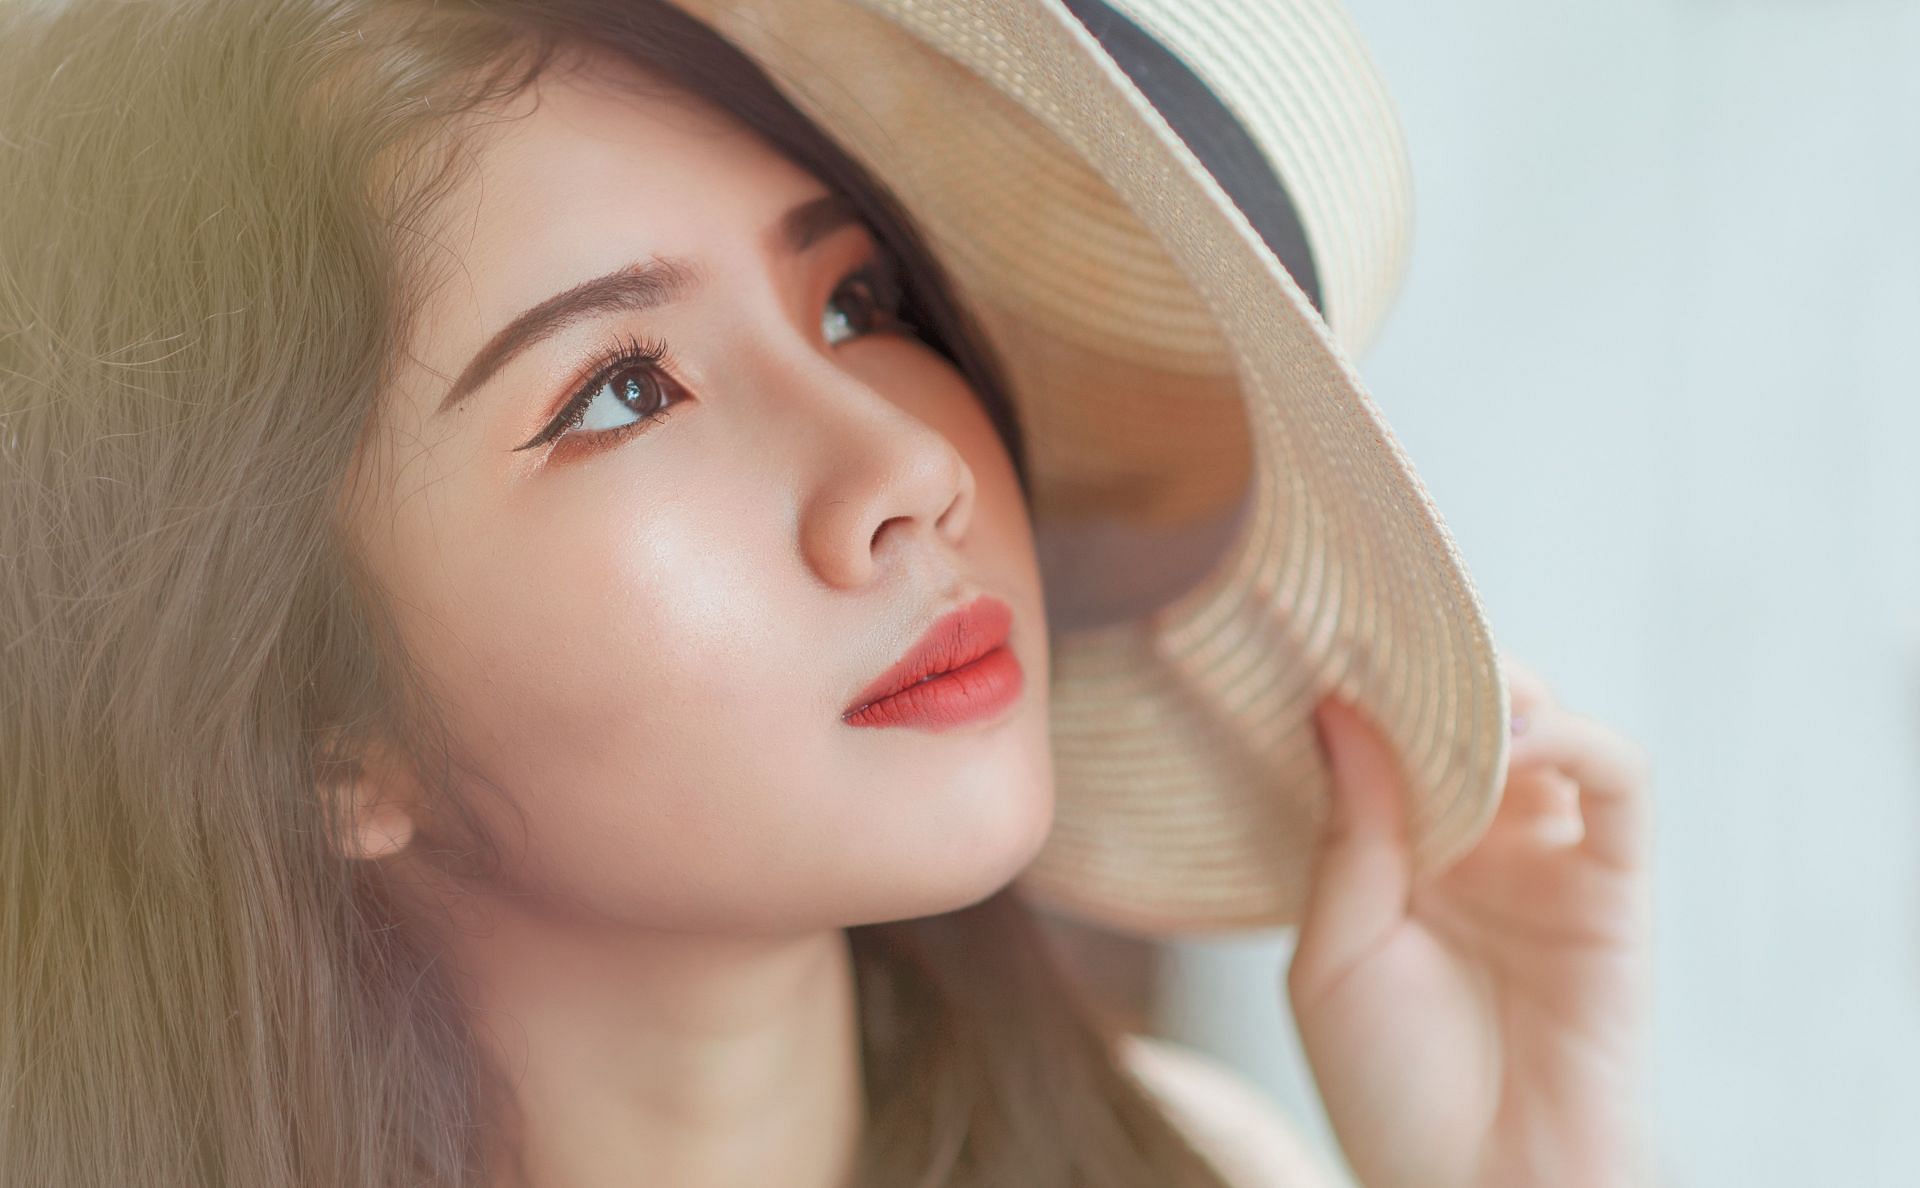 Many people could have uneven skin tones due to pigmentation or sun exposure. (Image via Pexels/ Min An)